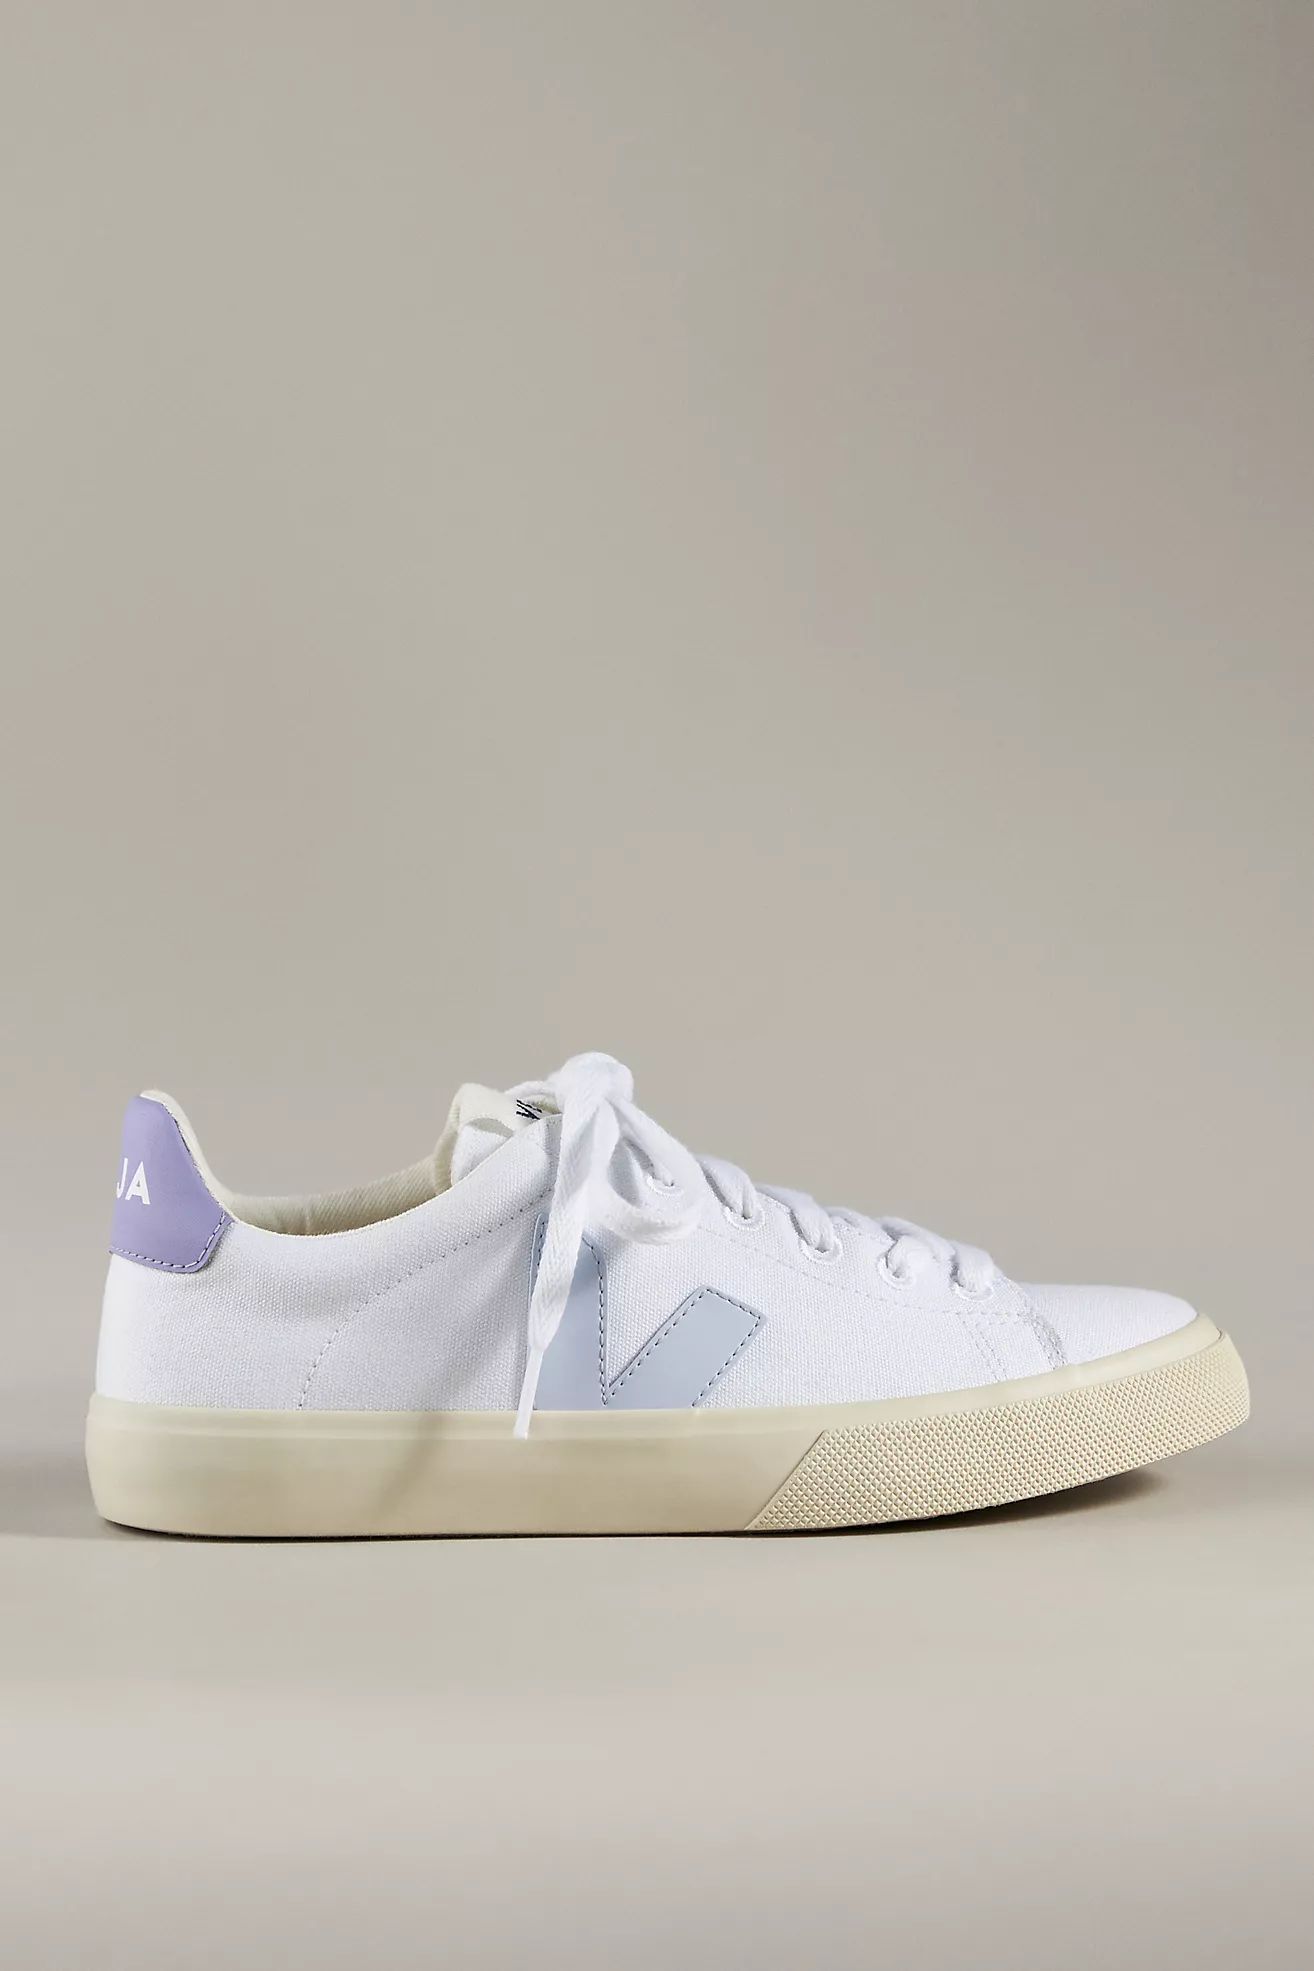 Veja Campo Canvas Sneakers | Anthropologie (US)